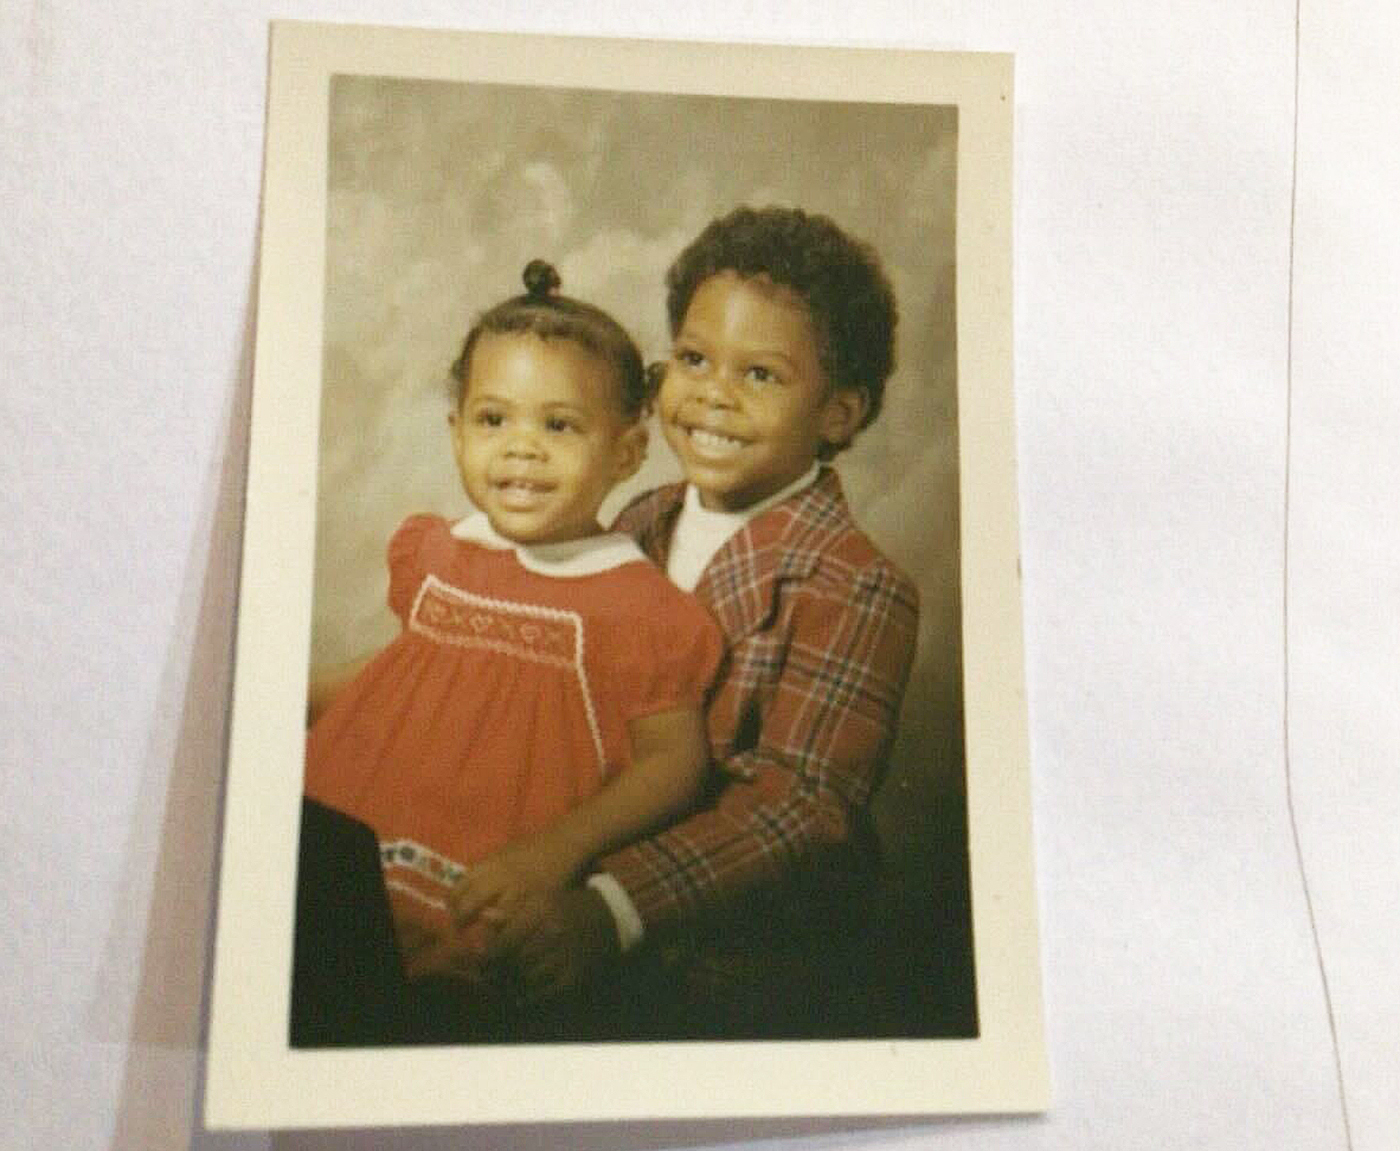 A vintage photo of two young children smiling; a girl in a red dress and a boy in a plaid shirt.